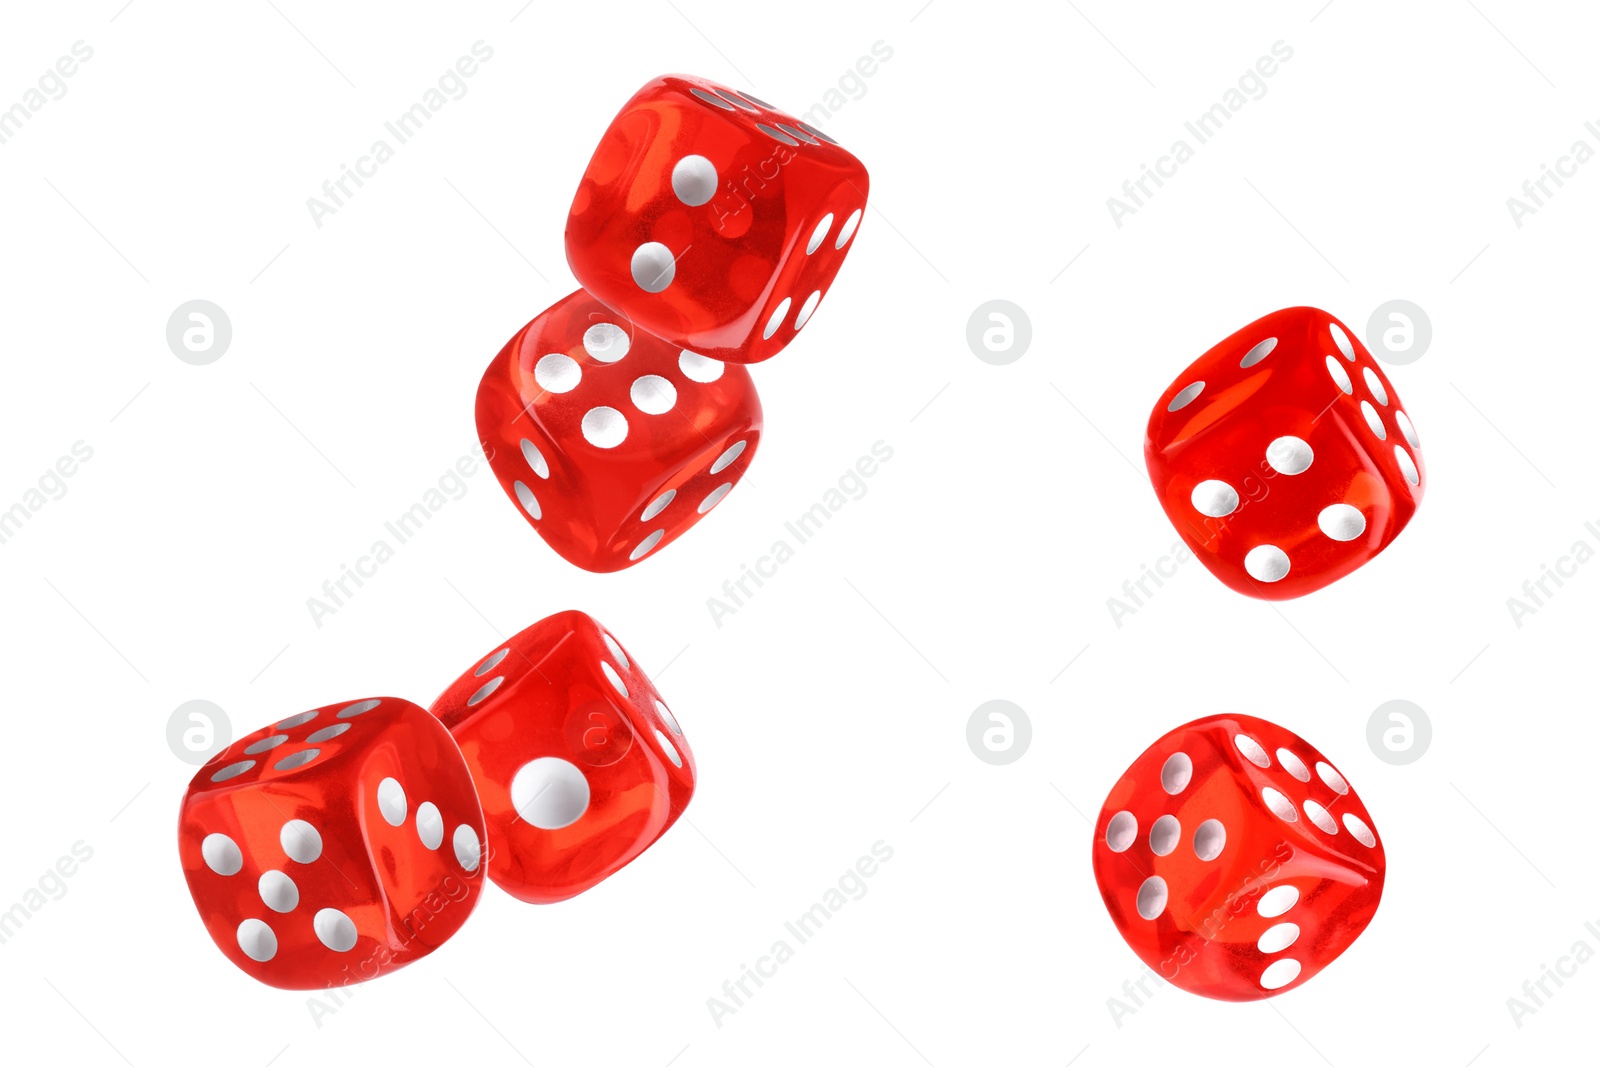 Image of Six red dice in air on white background